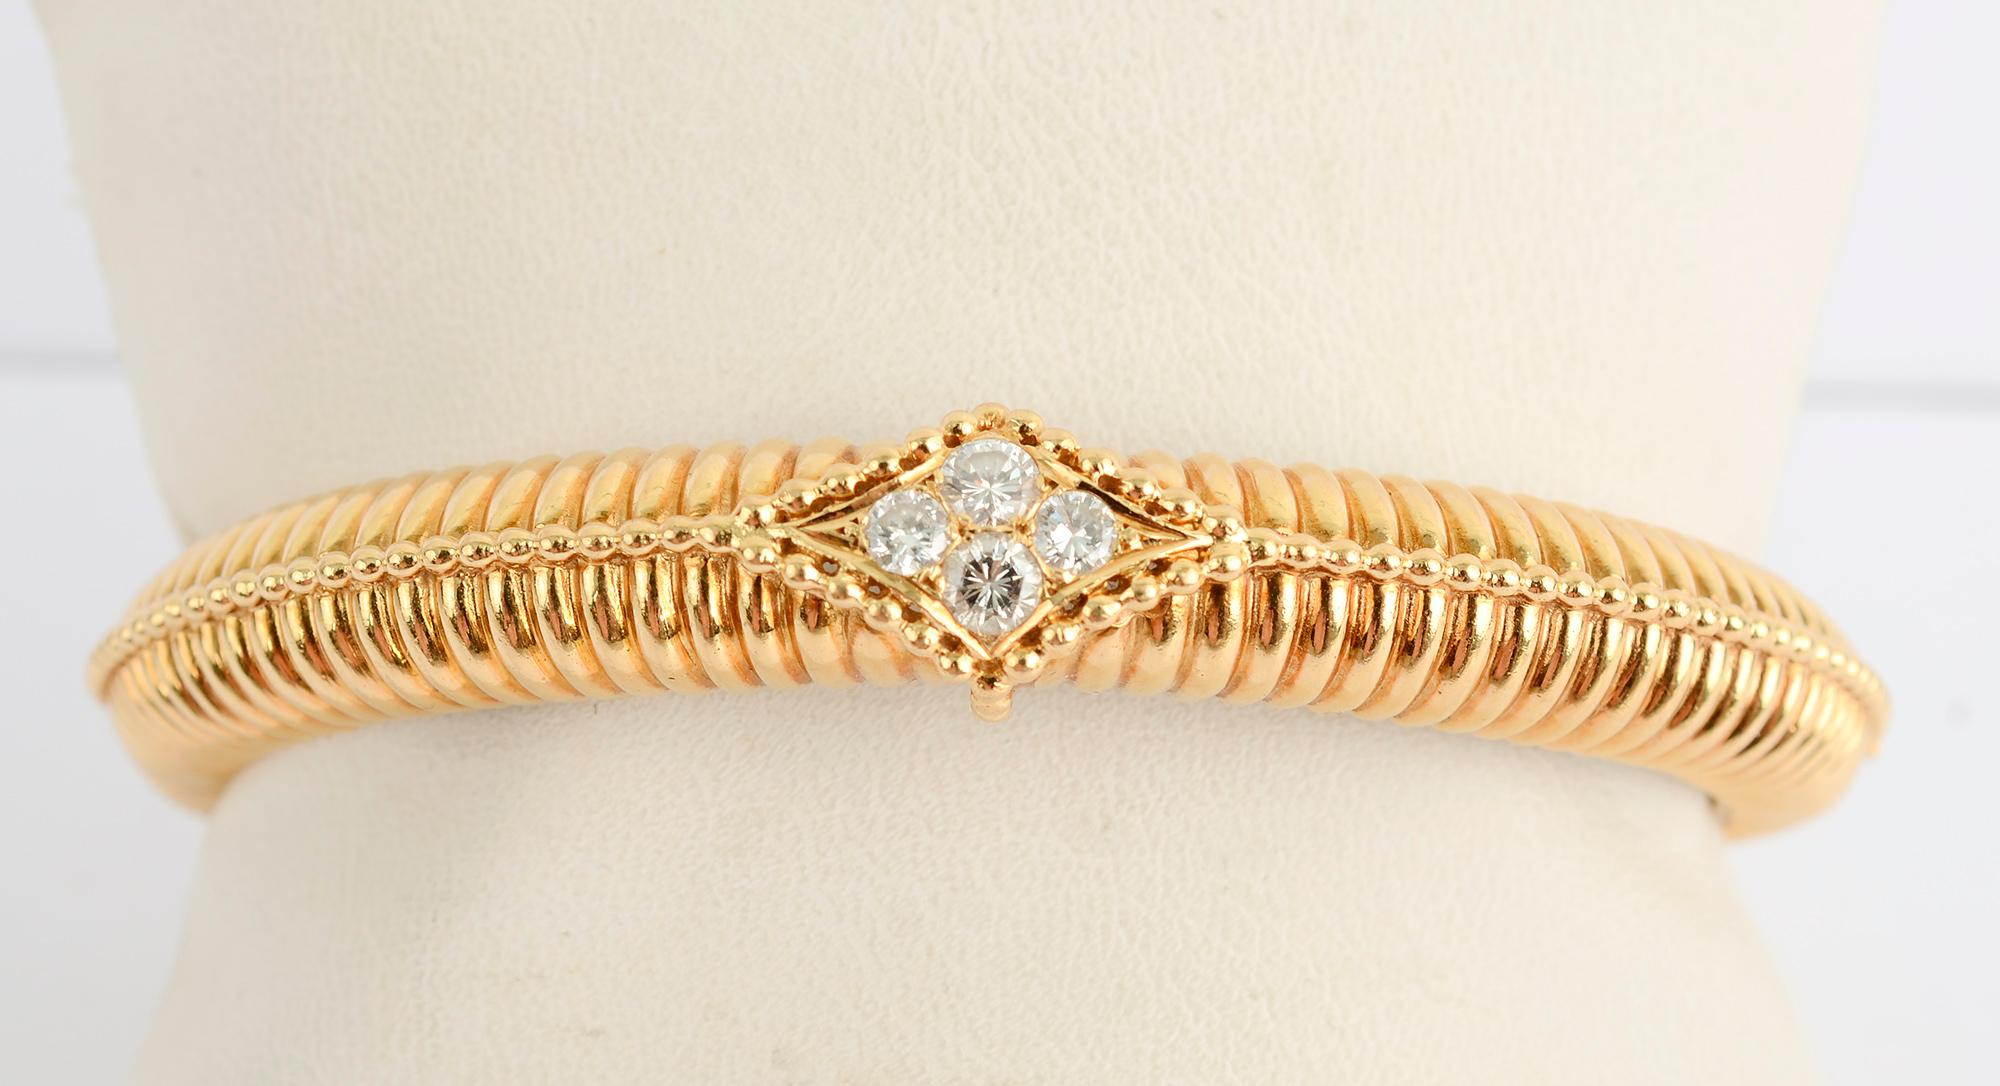 Van Cleef and Arpels ribbed, hinged bangle bracelet with four diamonds in the center. They weigh approximately .8 karats. The front of the bracelet is 7/16 of an inch wide tapering to 1/4 of an inch in the back. The inside diameter is 2 3/8